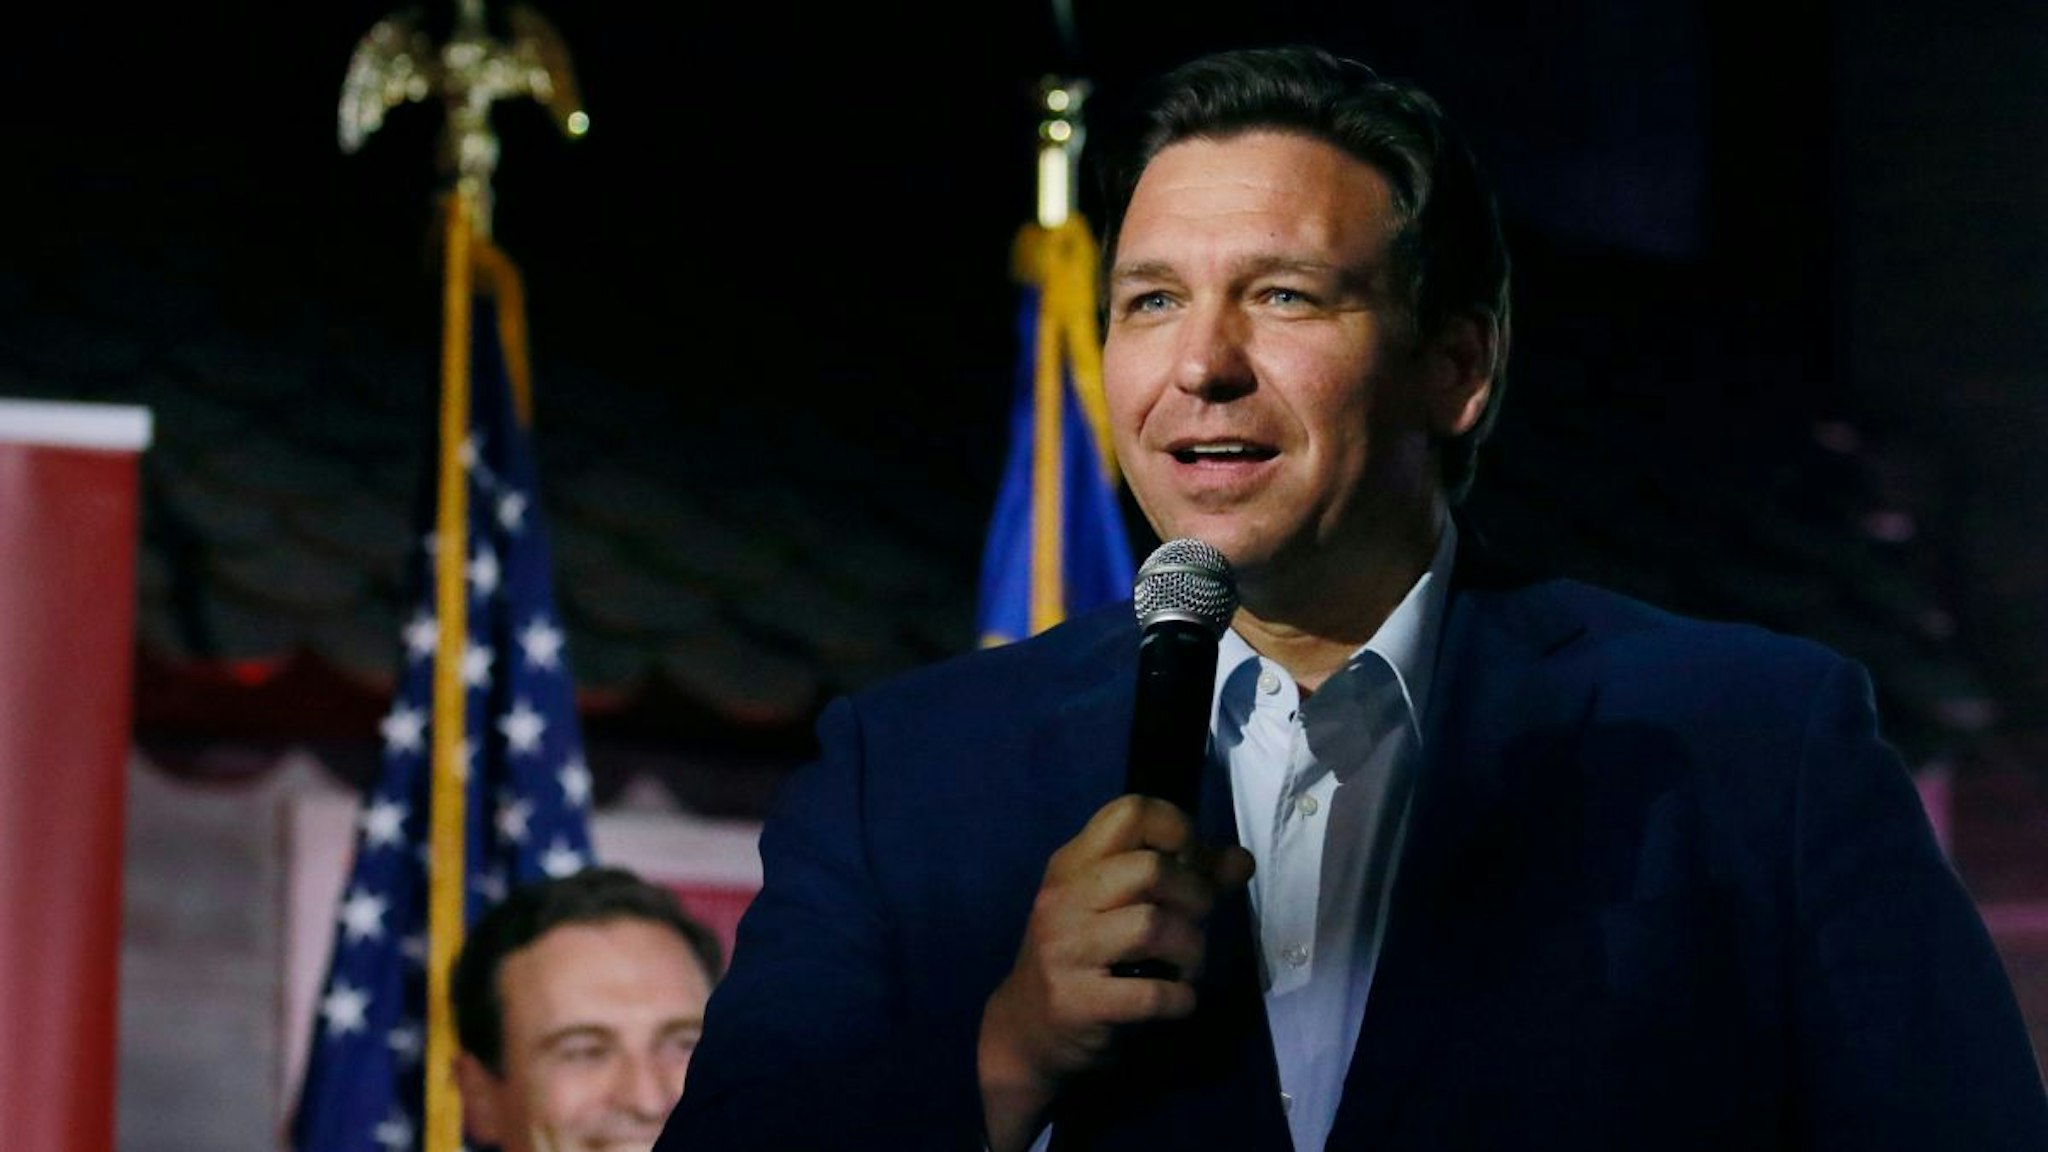 Florida Governor Ron DeSantis (R) appears with Republican Senate candidate from Nevada Adam Laxalt at a campaign event at Stoneys Rockin Country on April 27, 2022 in Las Vegas, Nevada.